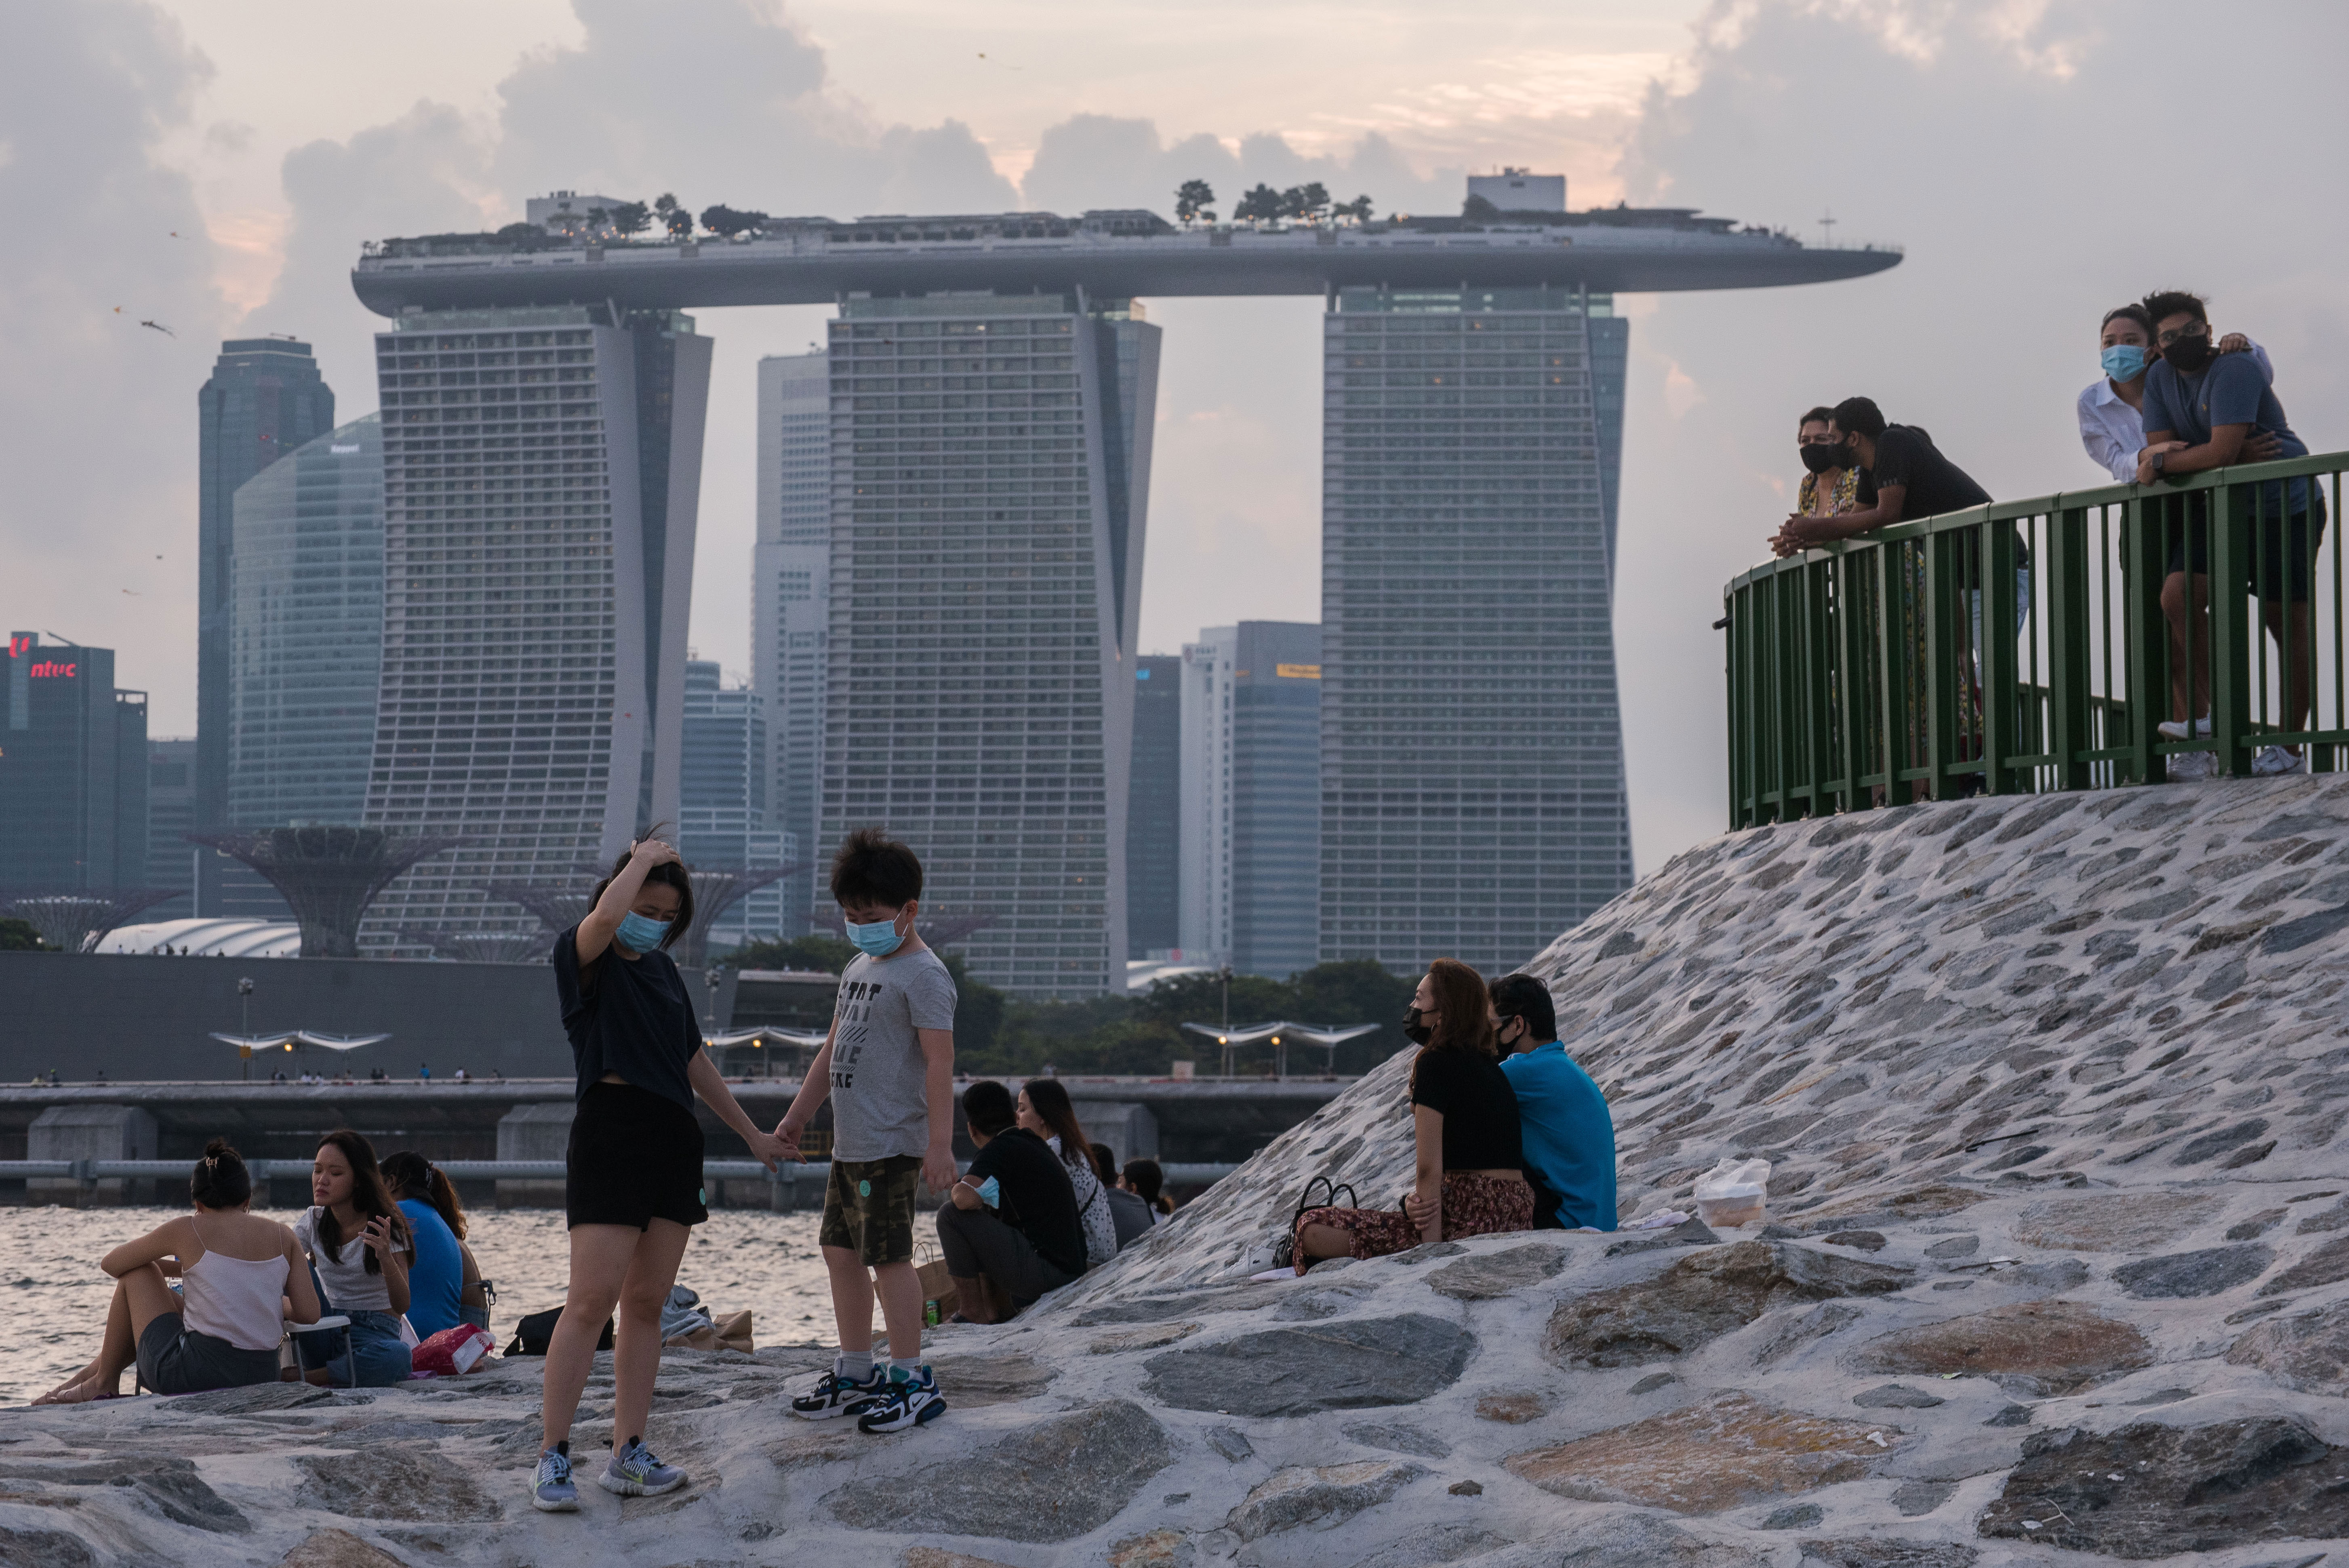 People in Singapore relax on a breakwater with the Marina Bay Sands in the background on June 6.